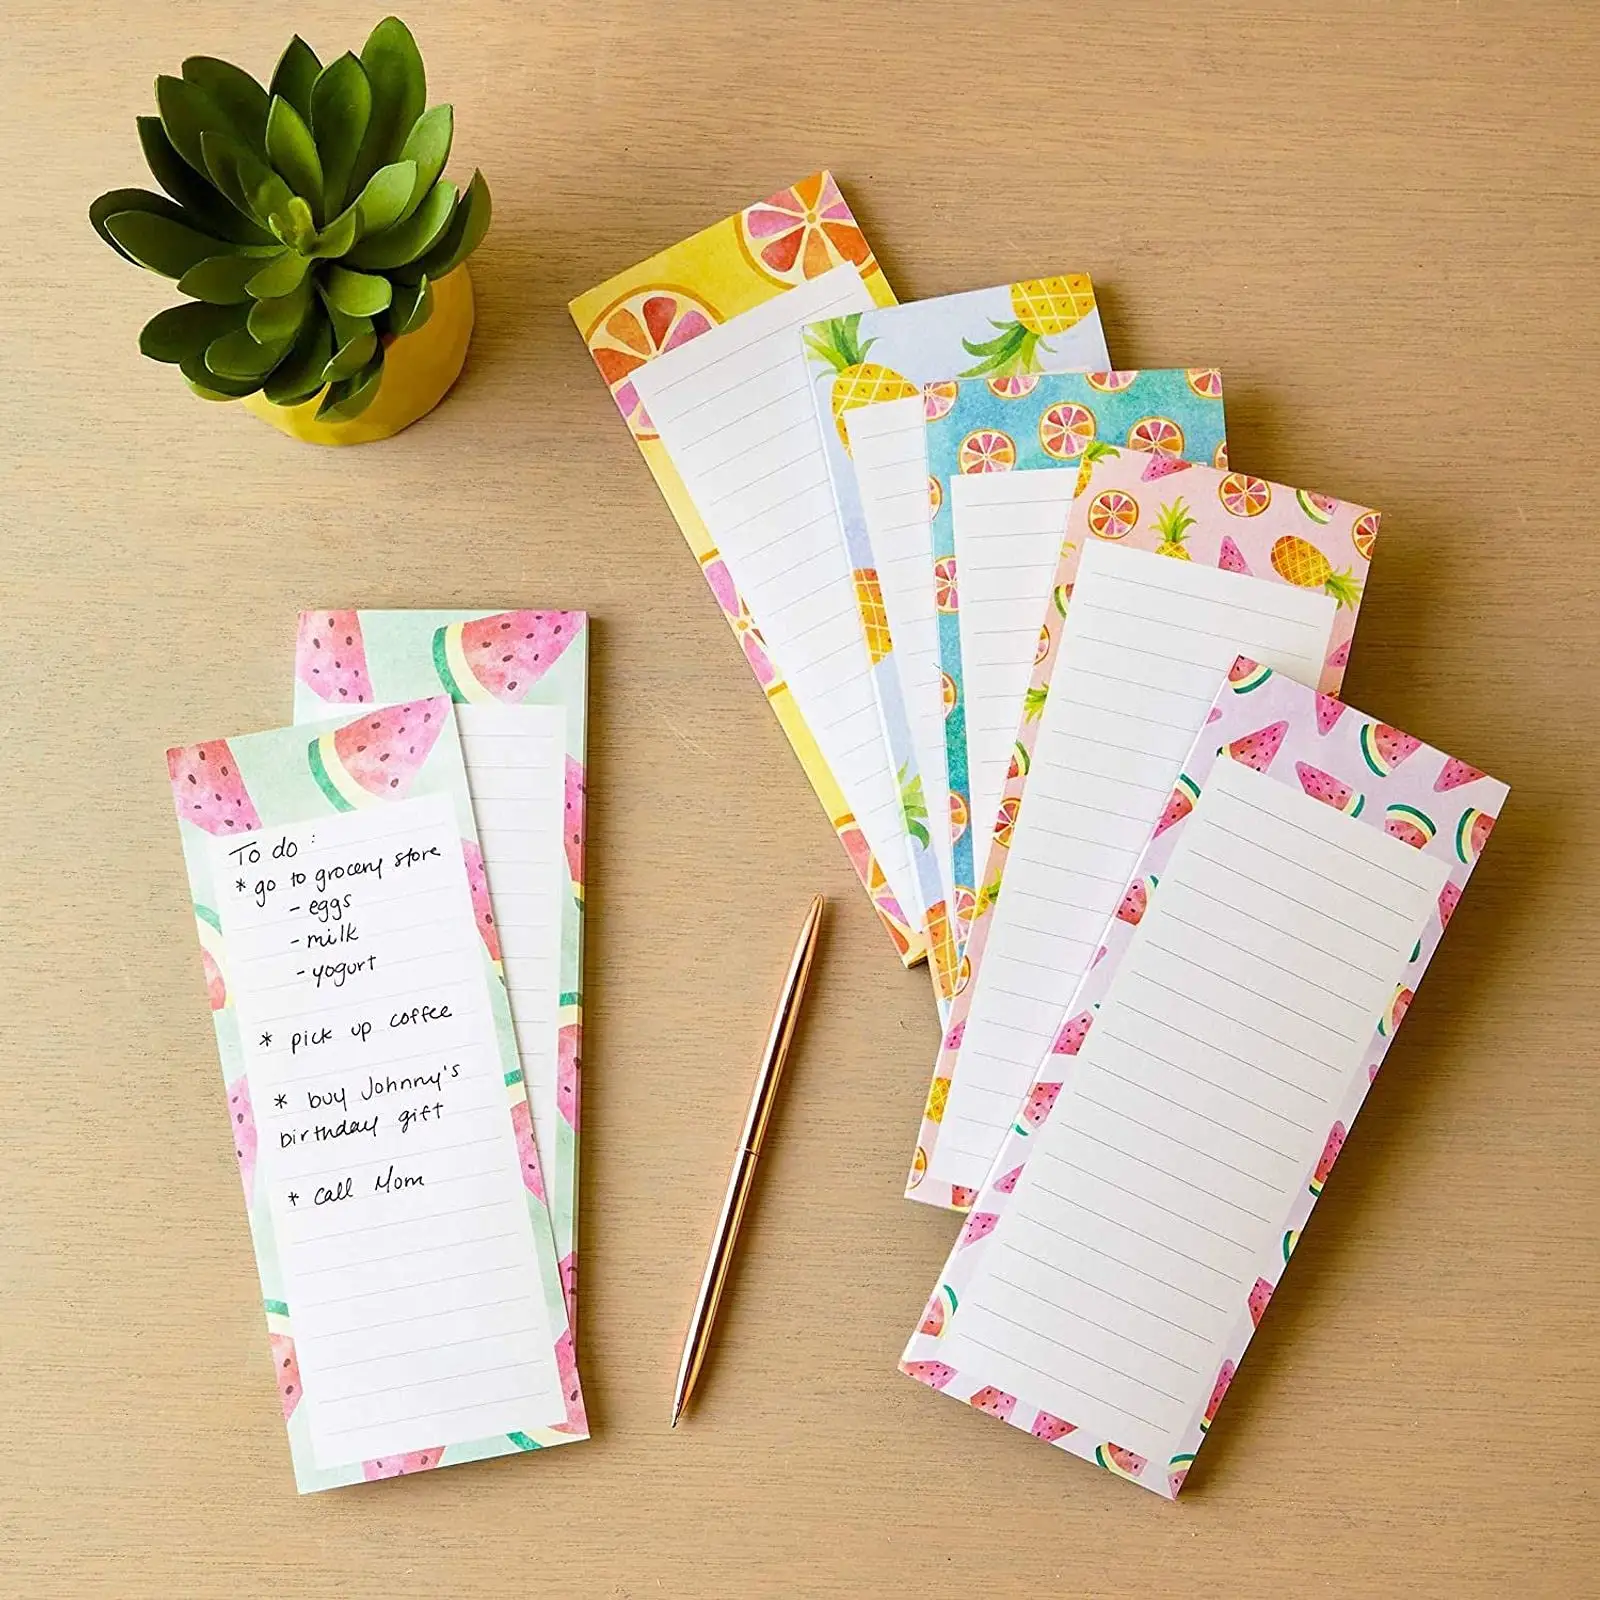 Magnetic Shopping List Pad Memos Fruit Design Fridge To Do List Note Pad Grocery Magnetic List